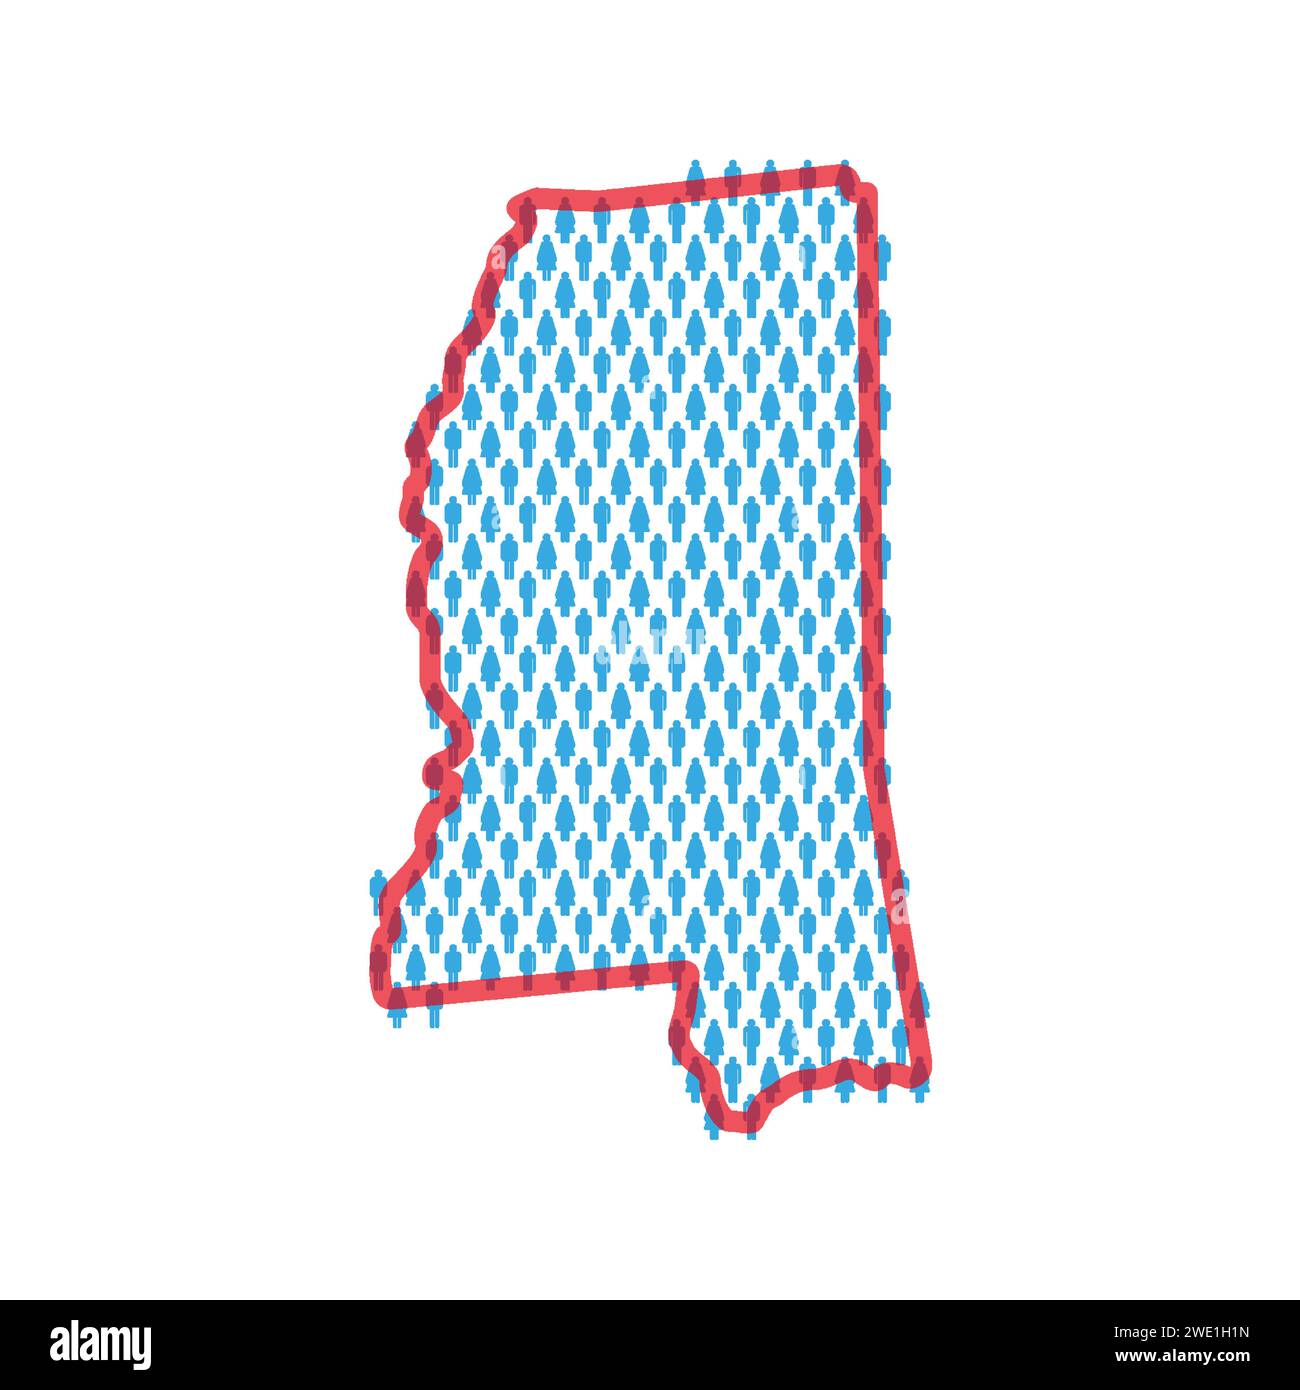 Mississippi population map. Stick figures people map with bold red translucent state border. Pattern of men and women icons. Isolated vector illustrat Stock Vector